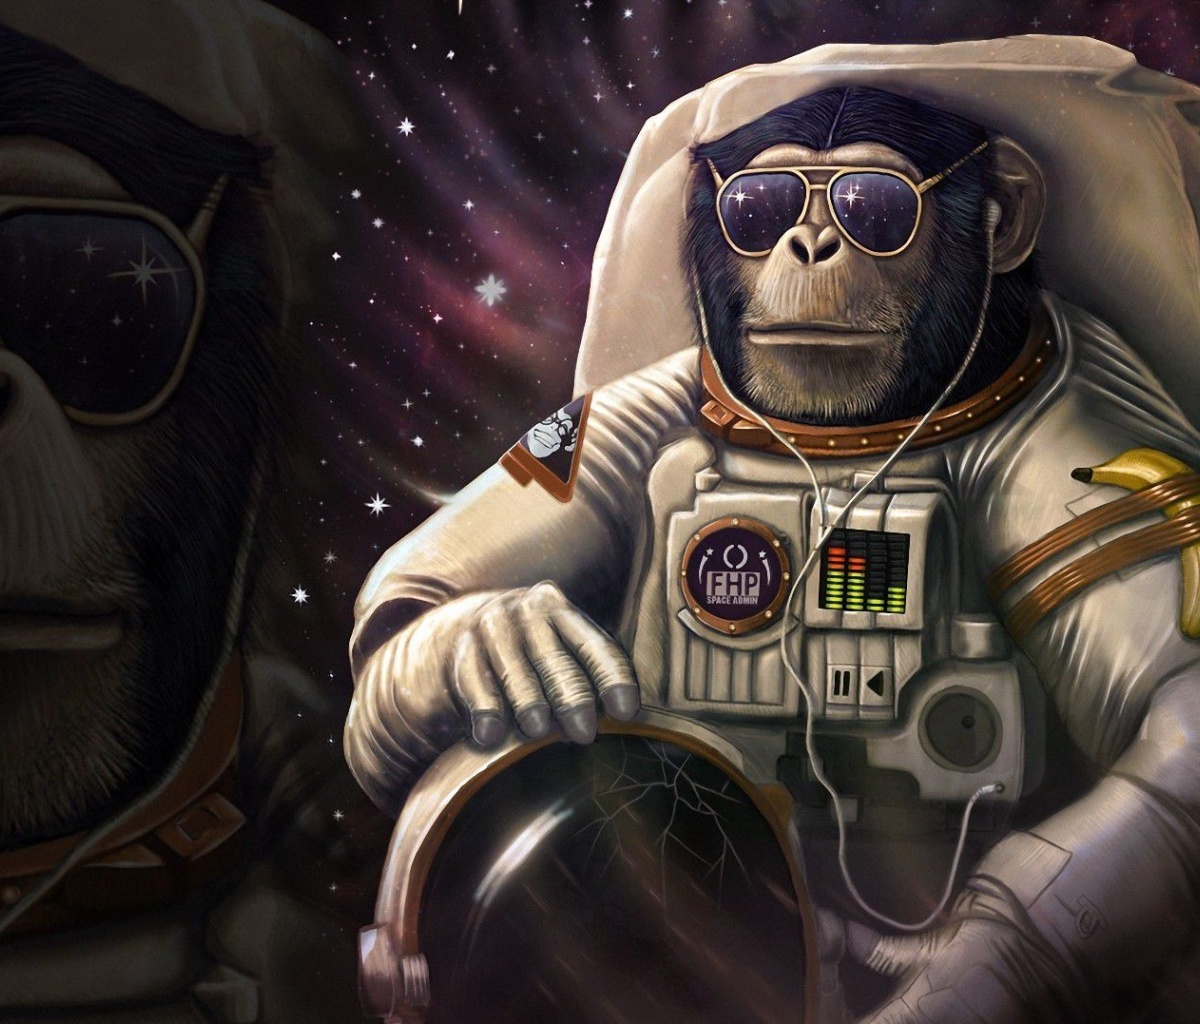 Monkeys and apes in space wallpaper 1200x1024